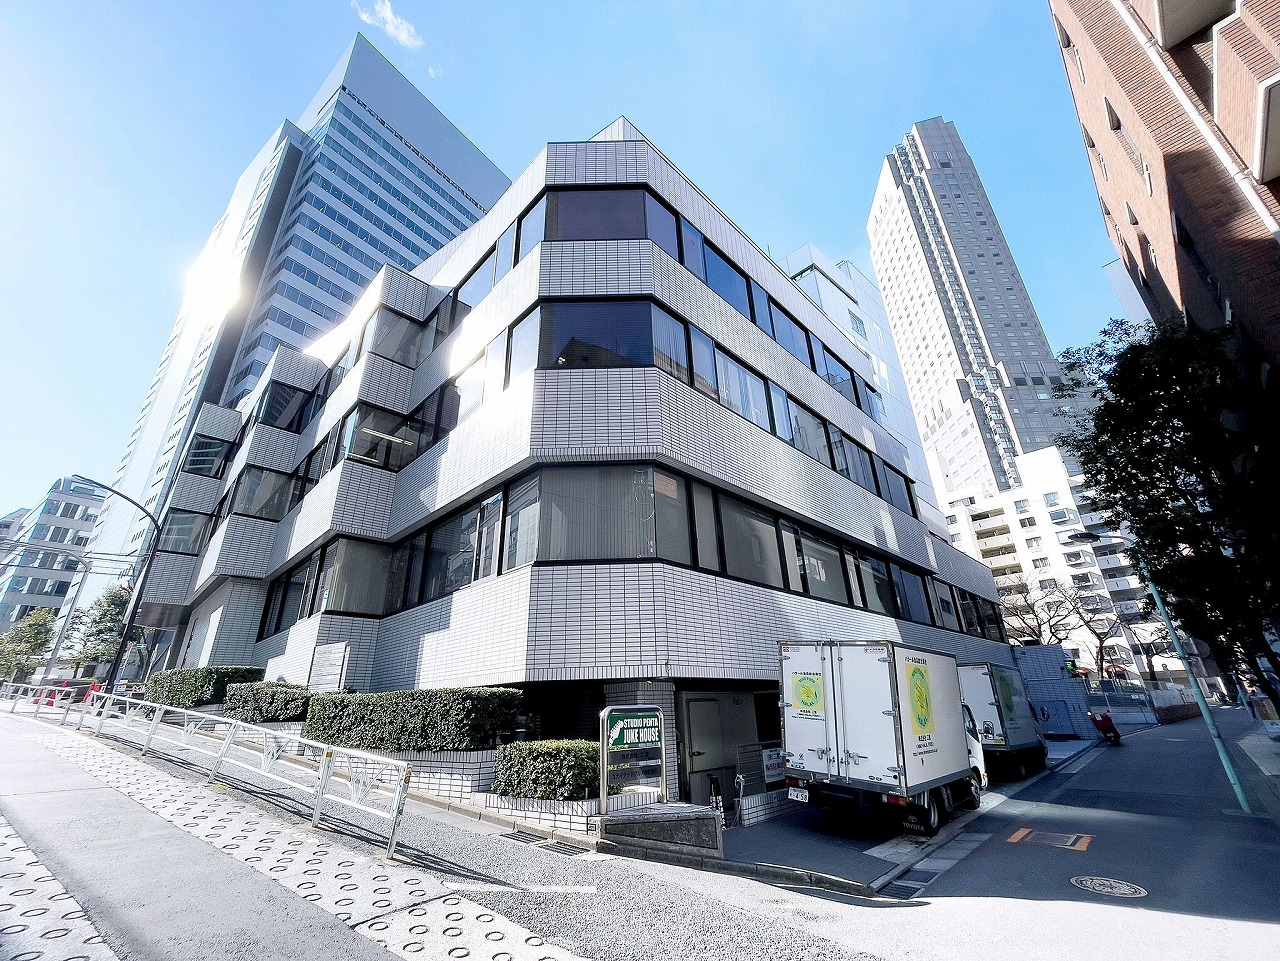 Exterior view of Ninomiya Building. Located a 5-minute walk from Exit C2 of Shibuya Station.